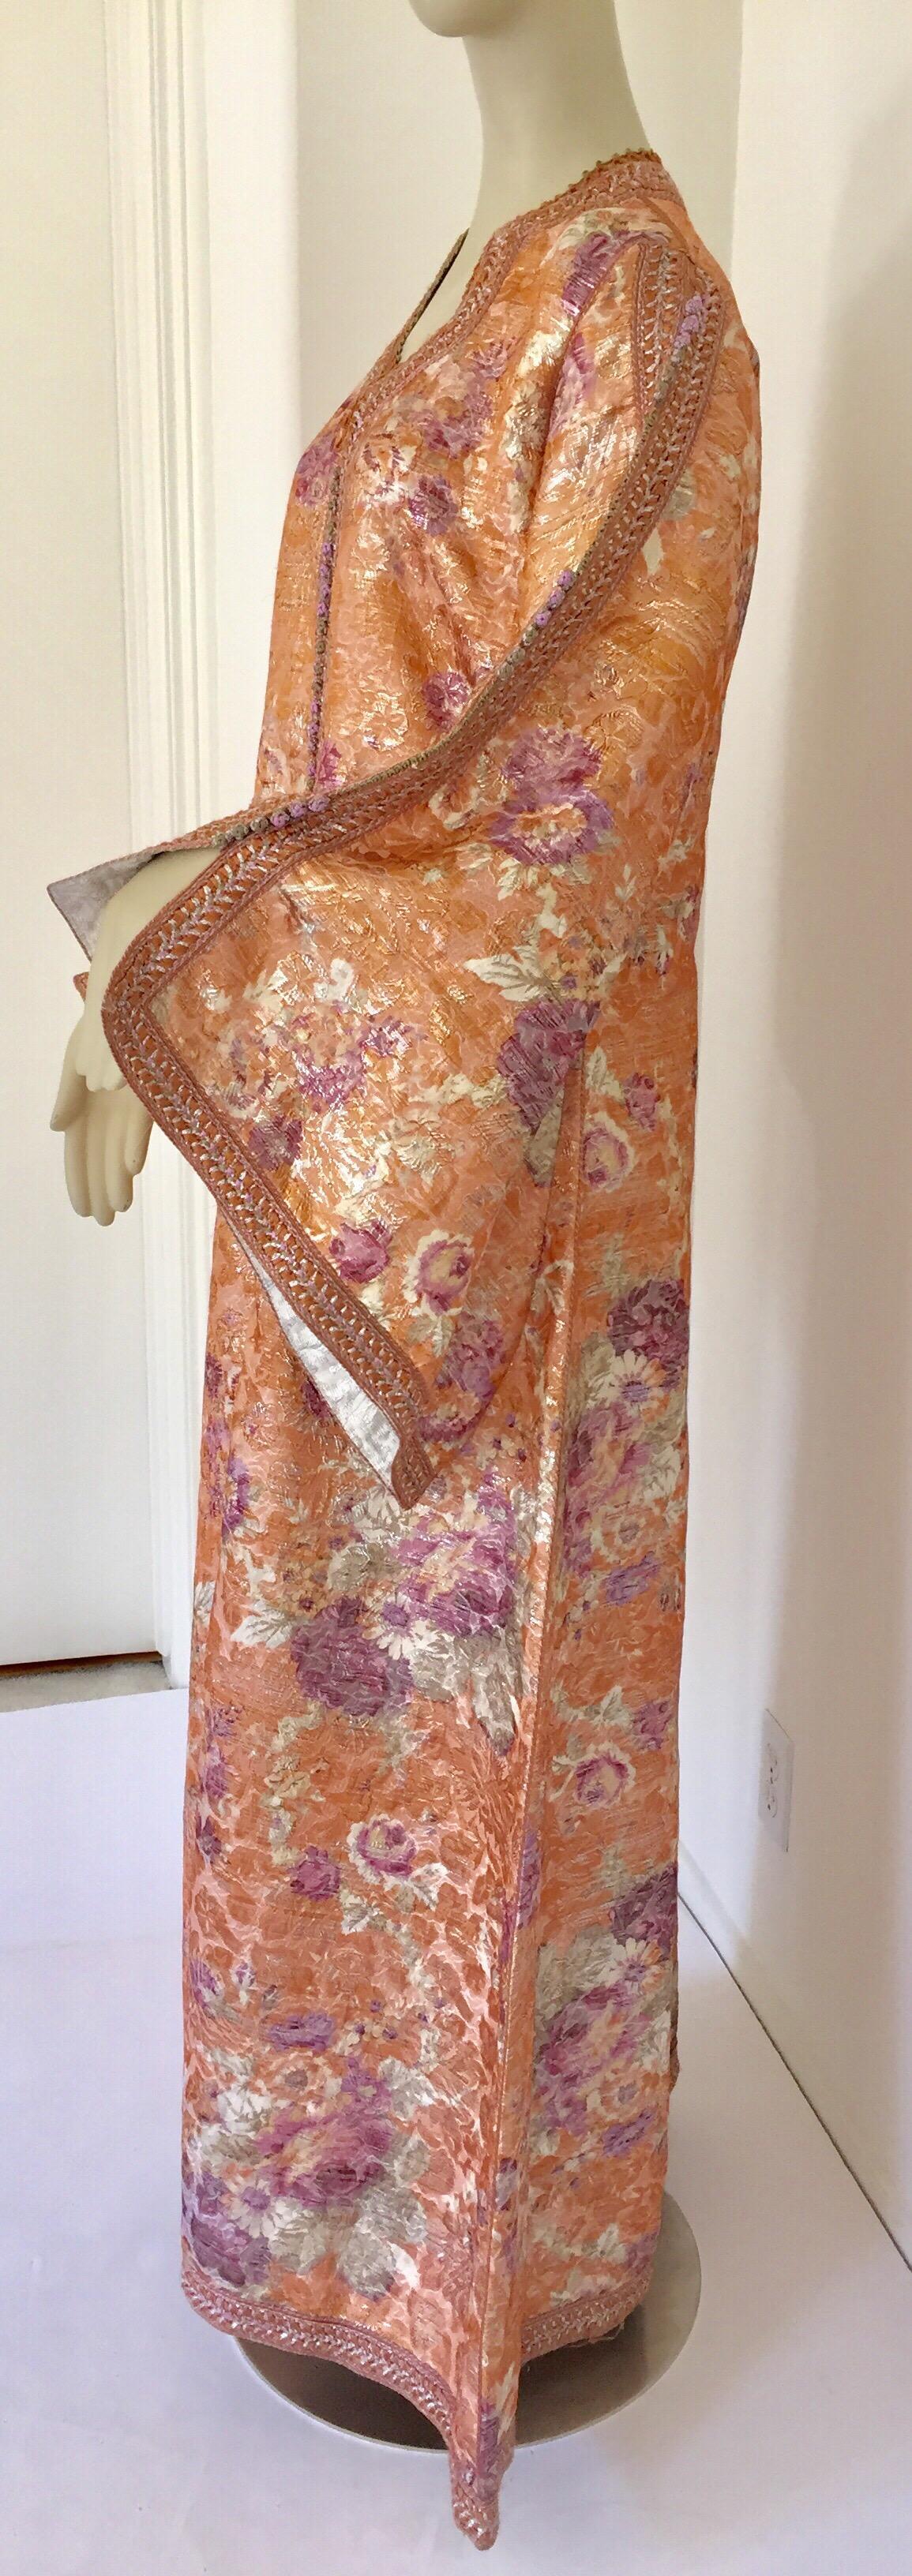 Moroccan Kaftan Orange and Purple Floral with Gold Embroidered Maxi Dress Caftan For Sale 4